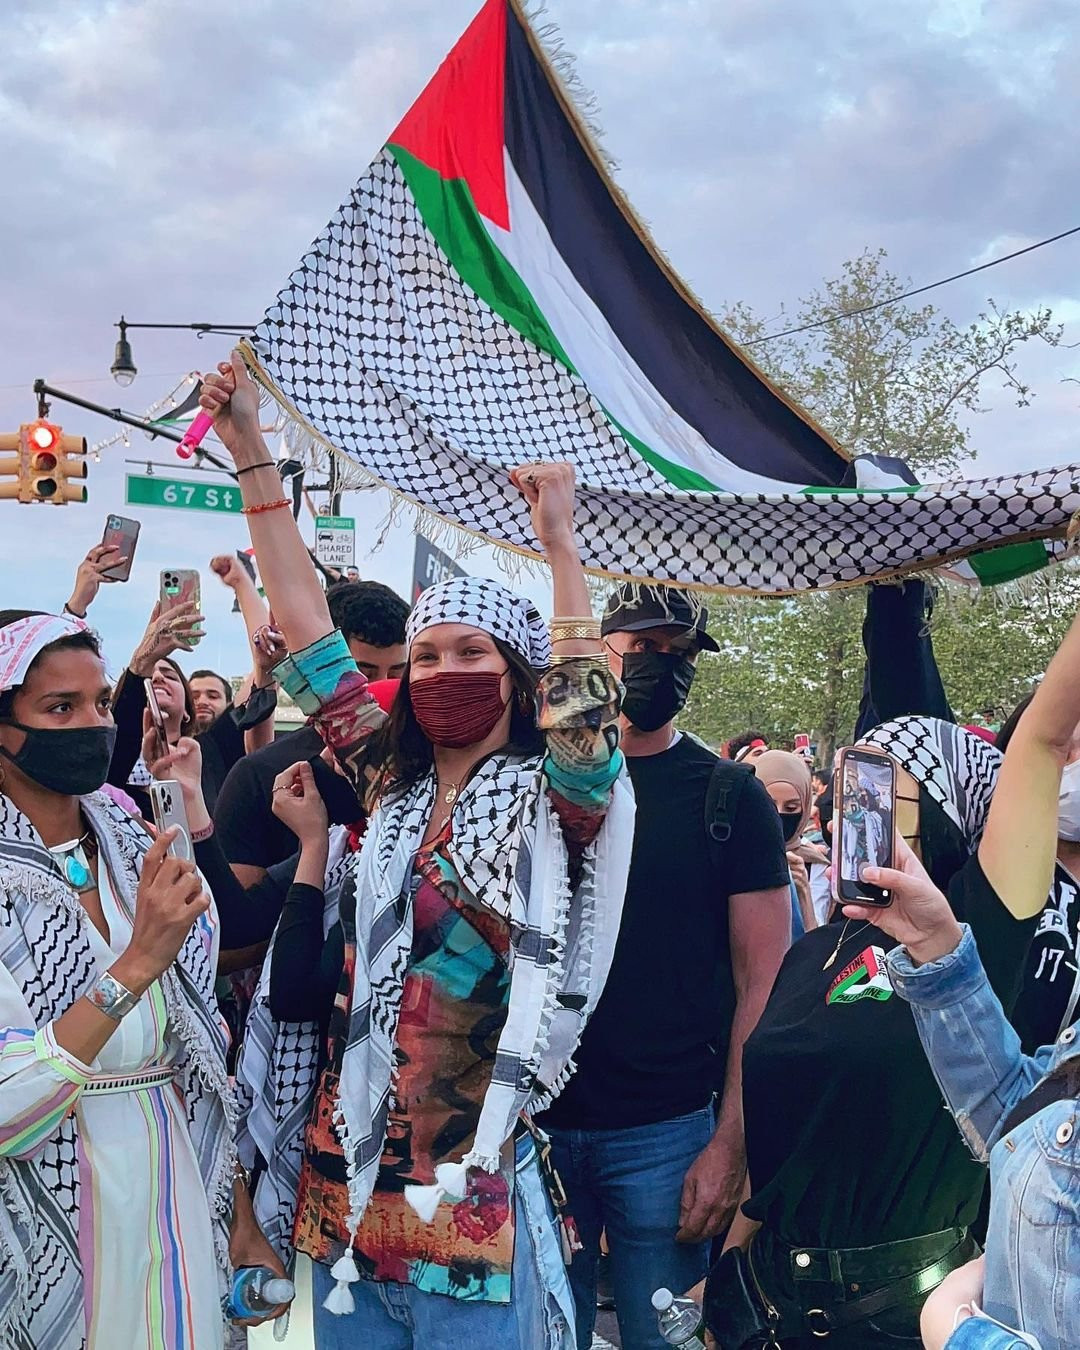 In pictures: Bella Hadid joins pro-Palestine protest in NYC